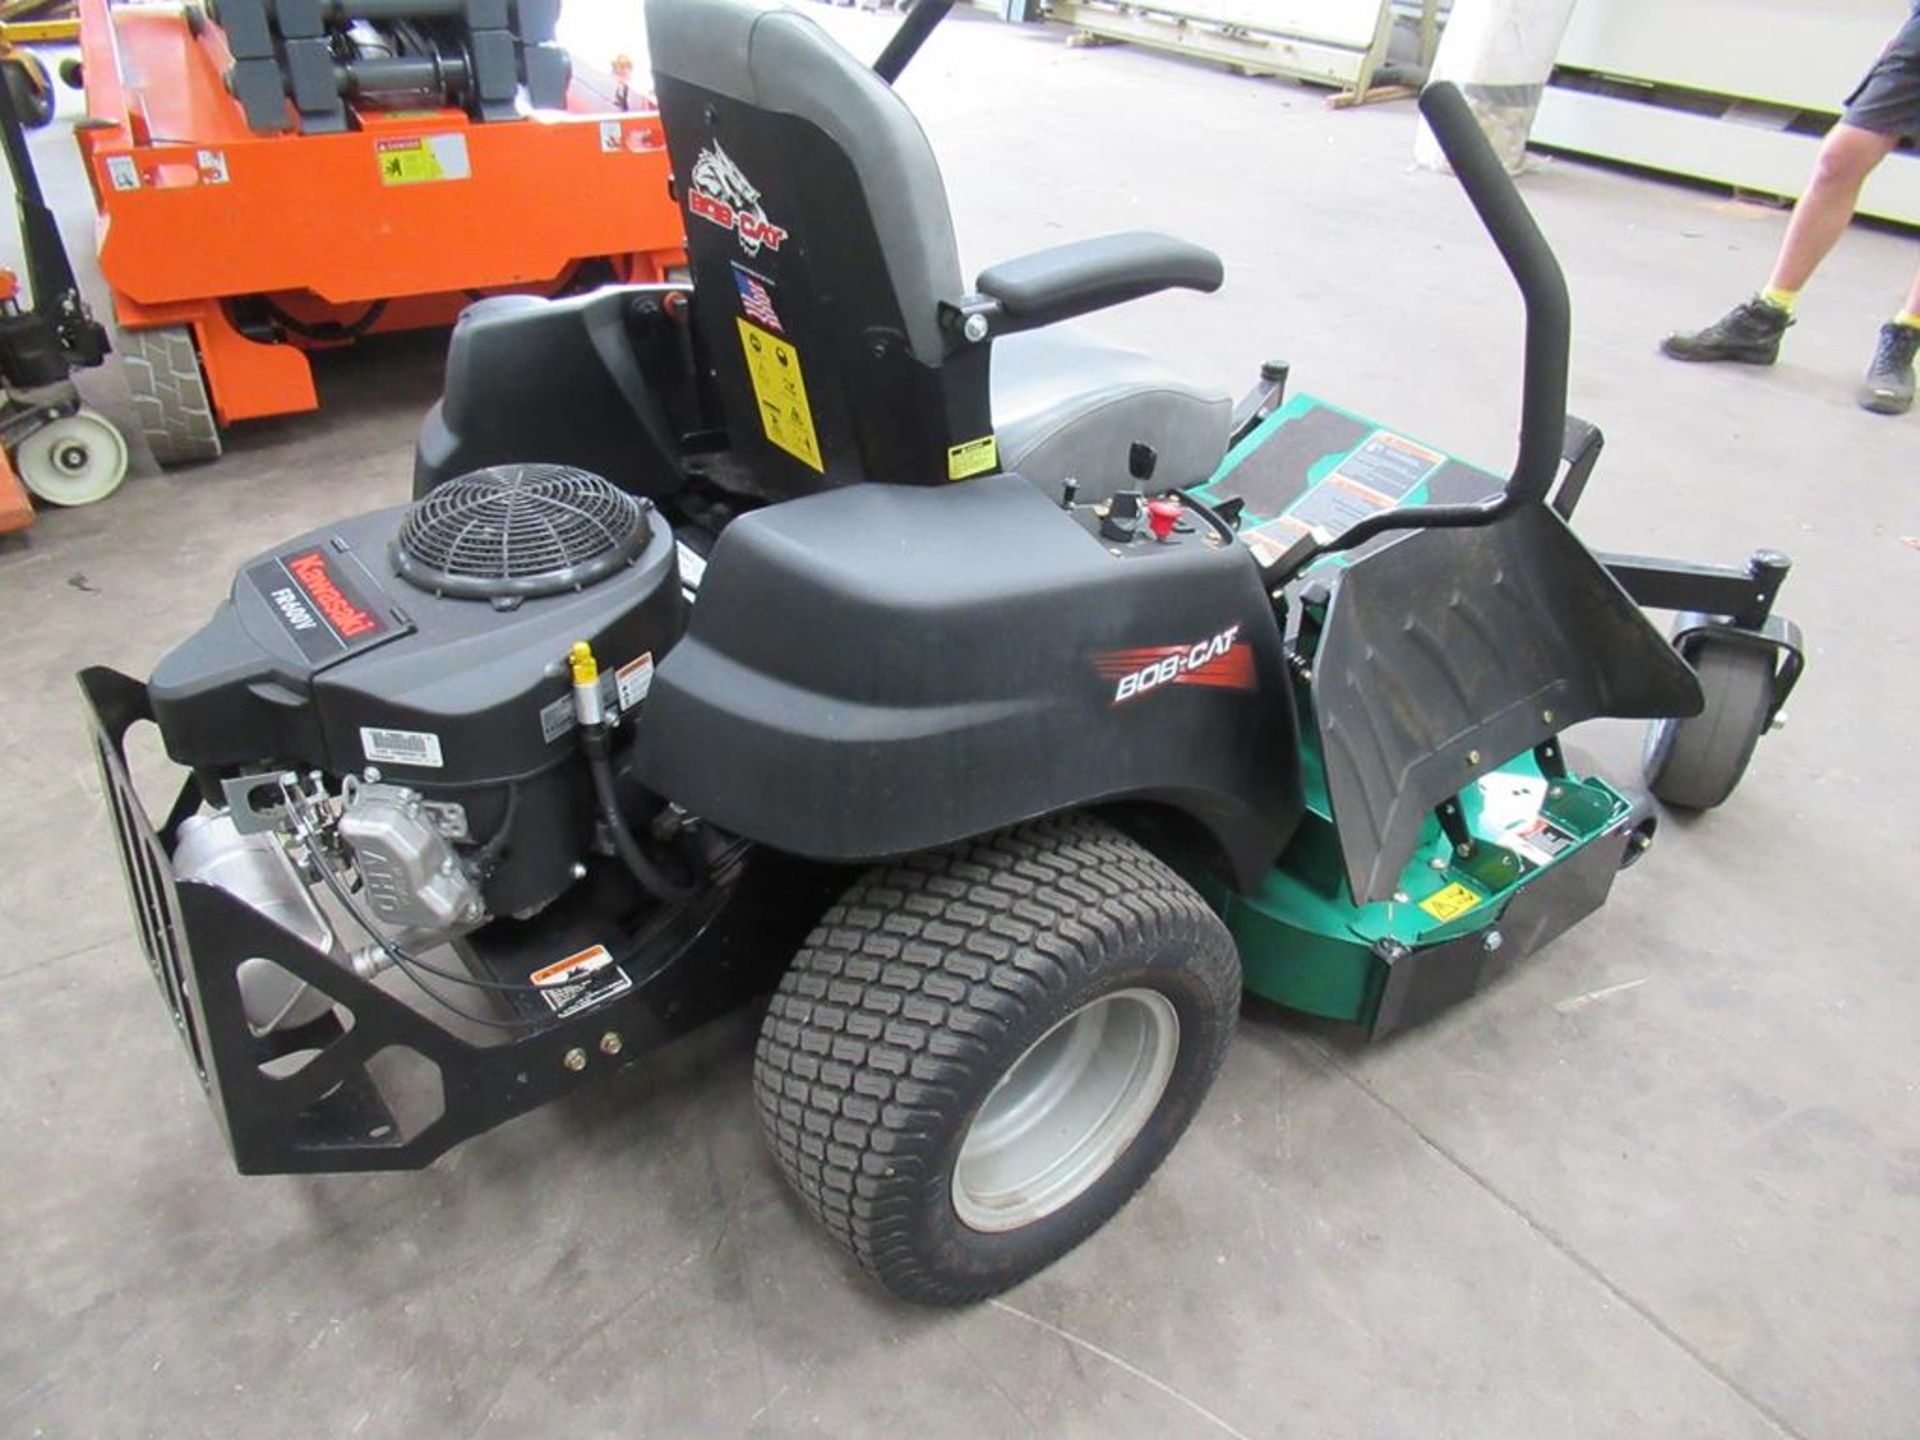 Bobcat CRZ 48" Zero turn ride on mower including Mulch Kit (12hrs). Please Note This Lot is Buyer to - Image 4 of 6